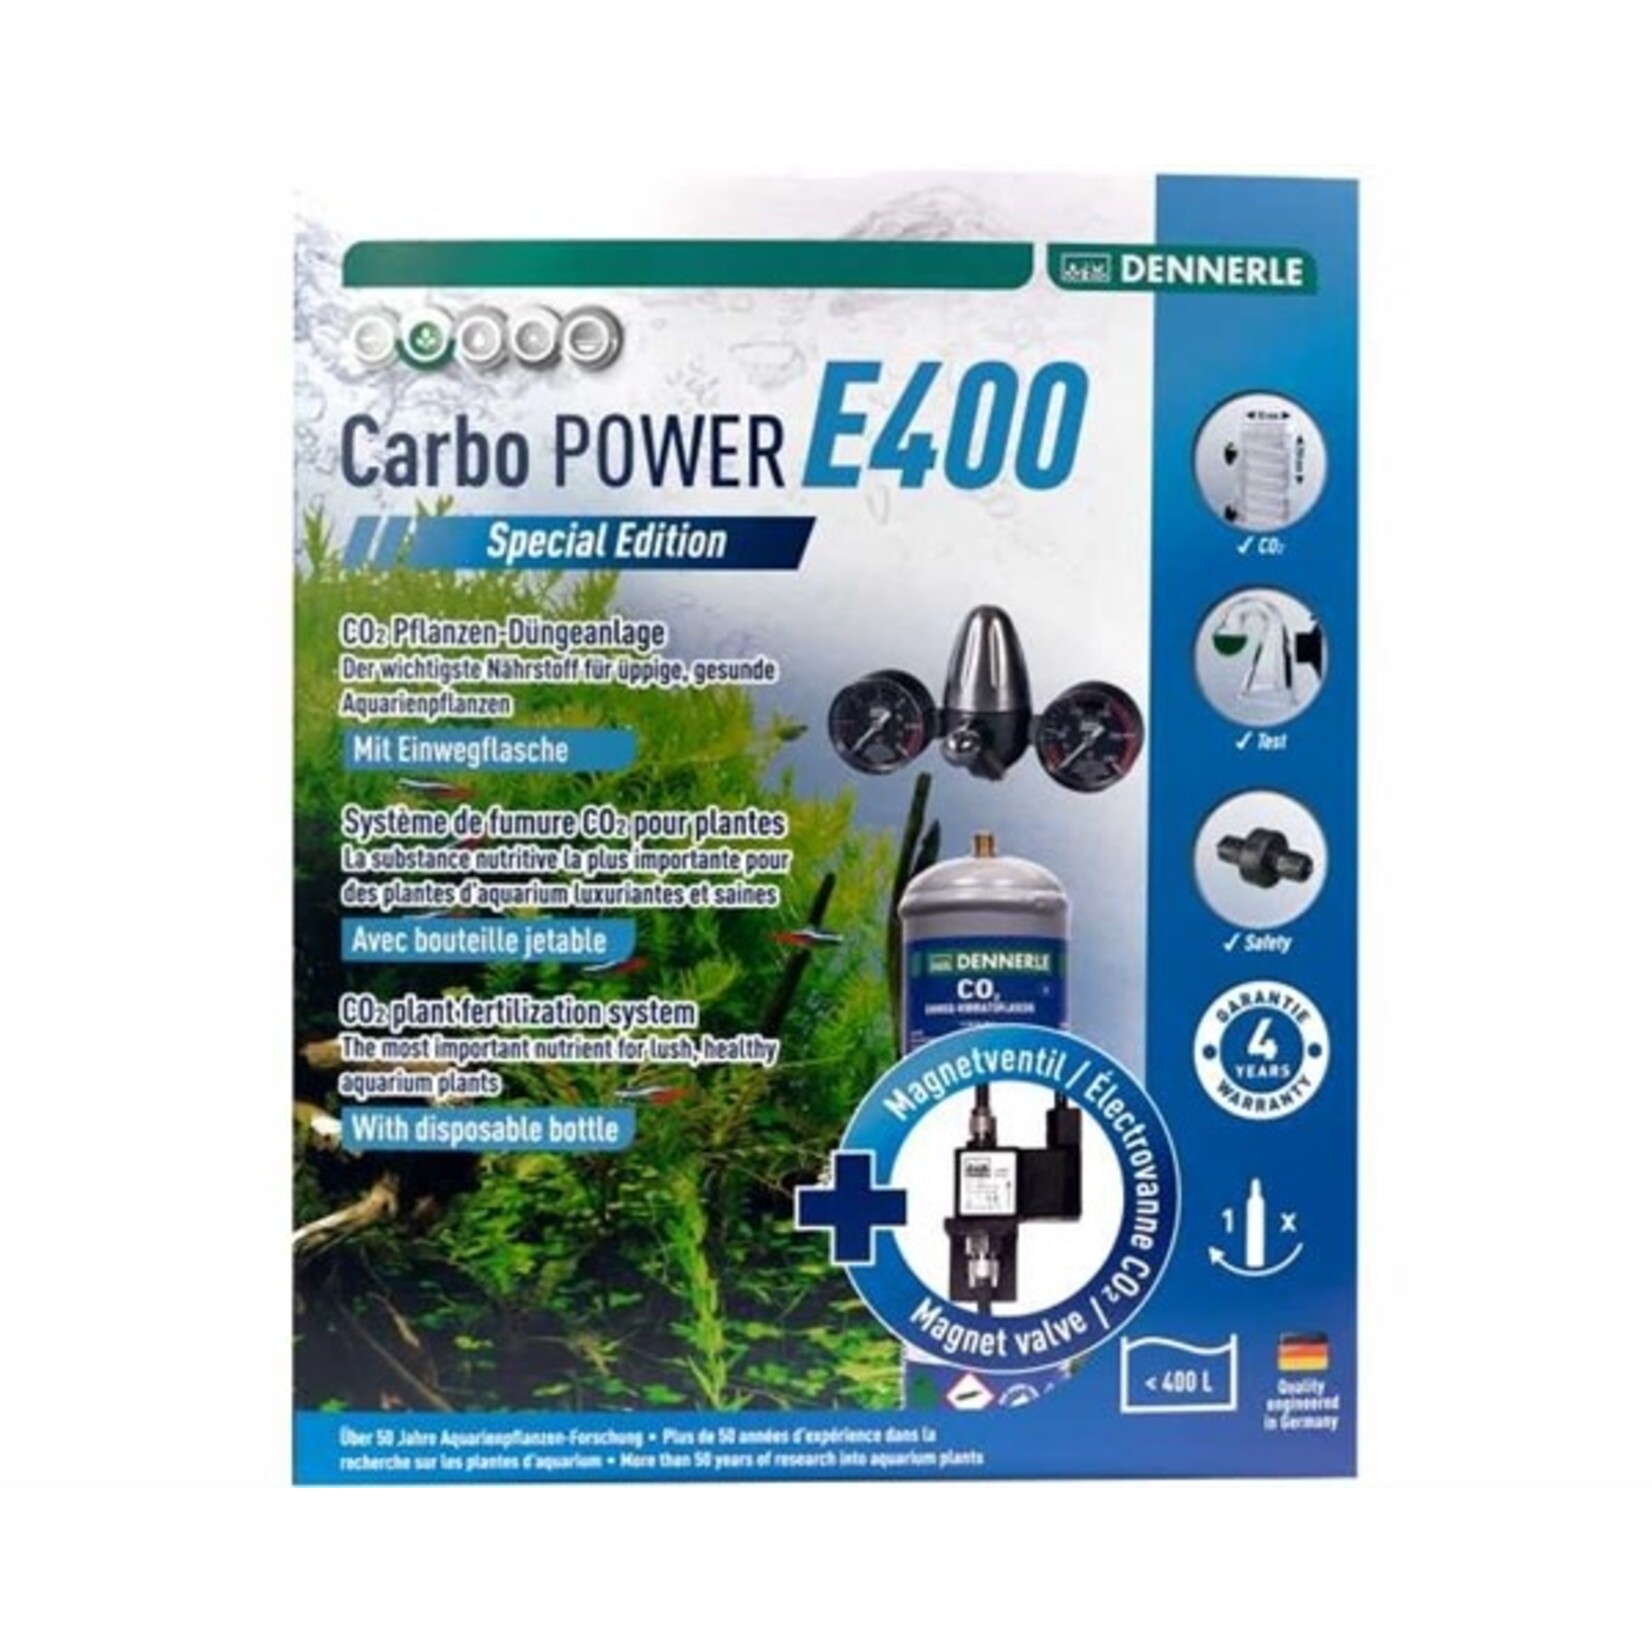 Dennerle co2 wegwerp carbo power e400 special edition